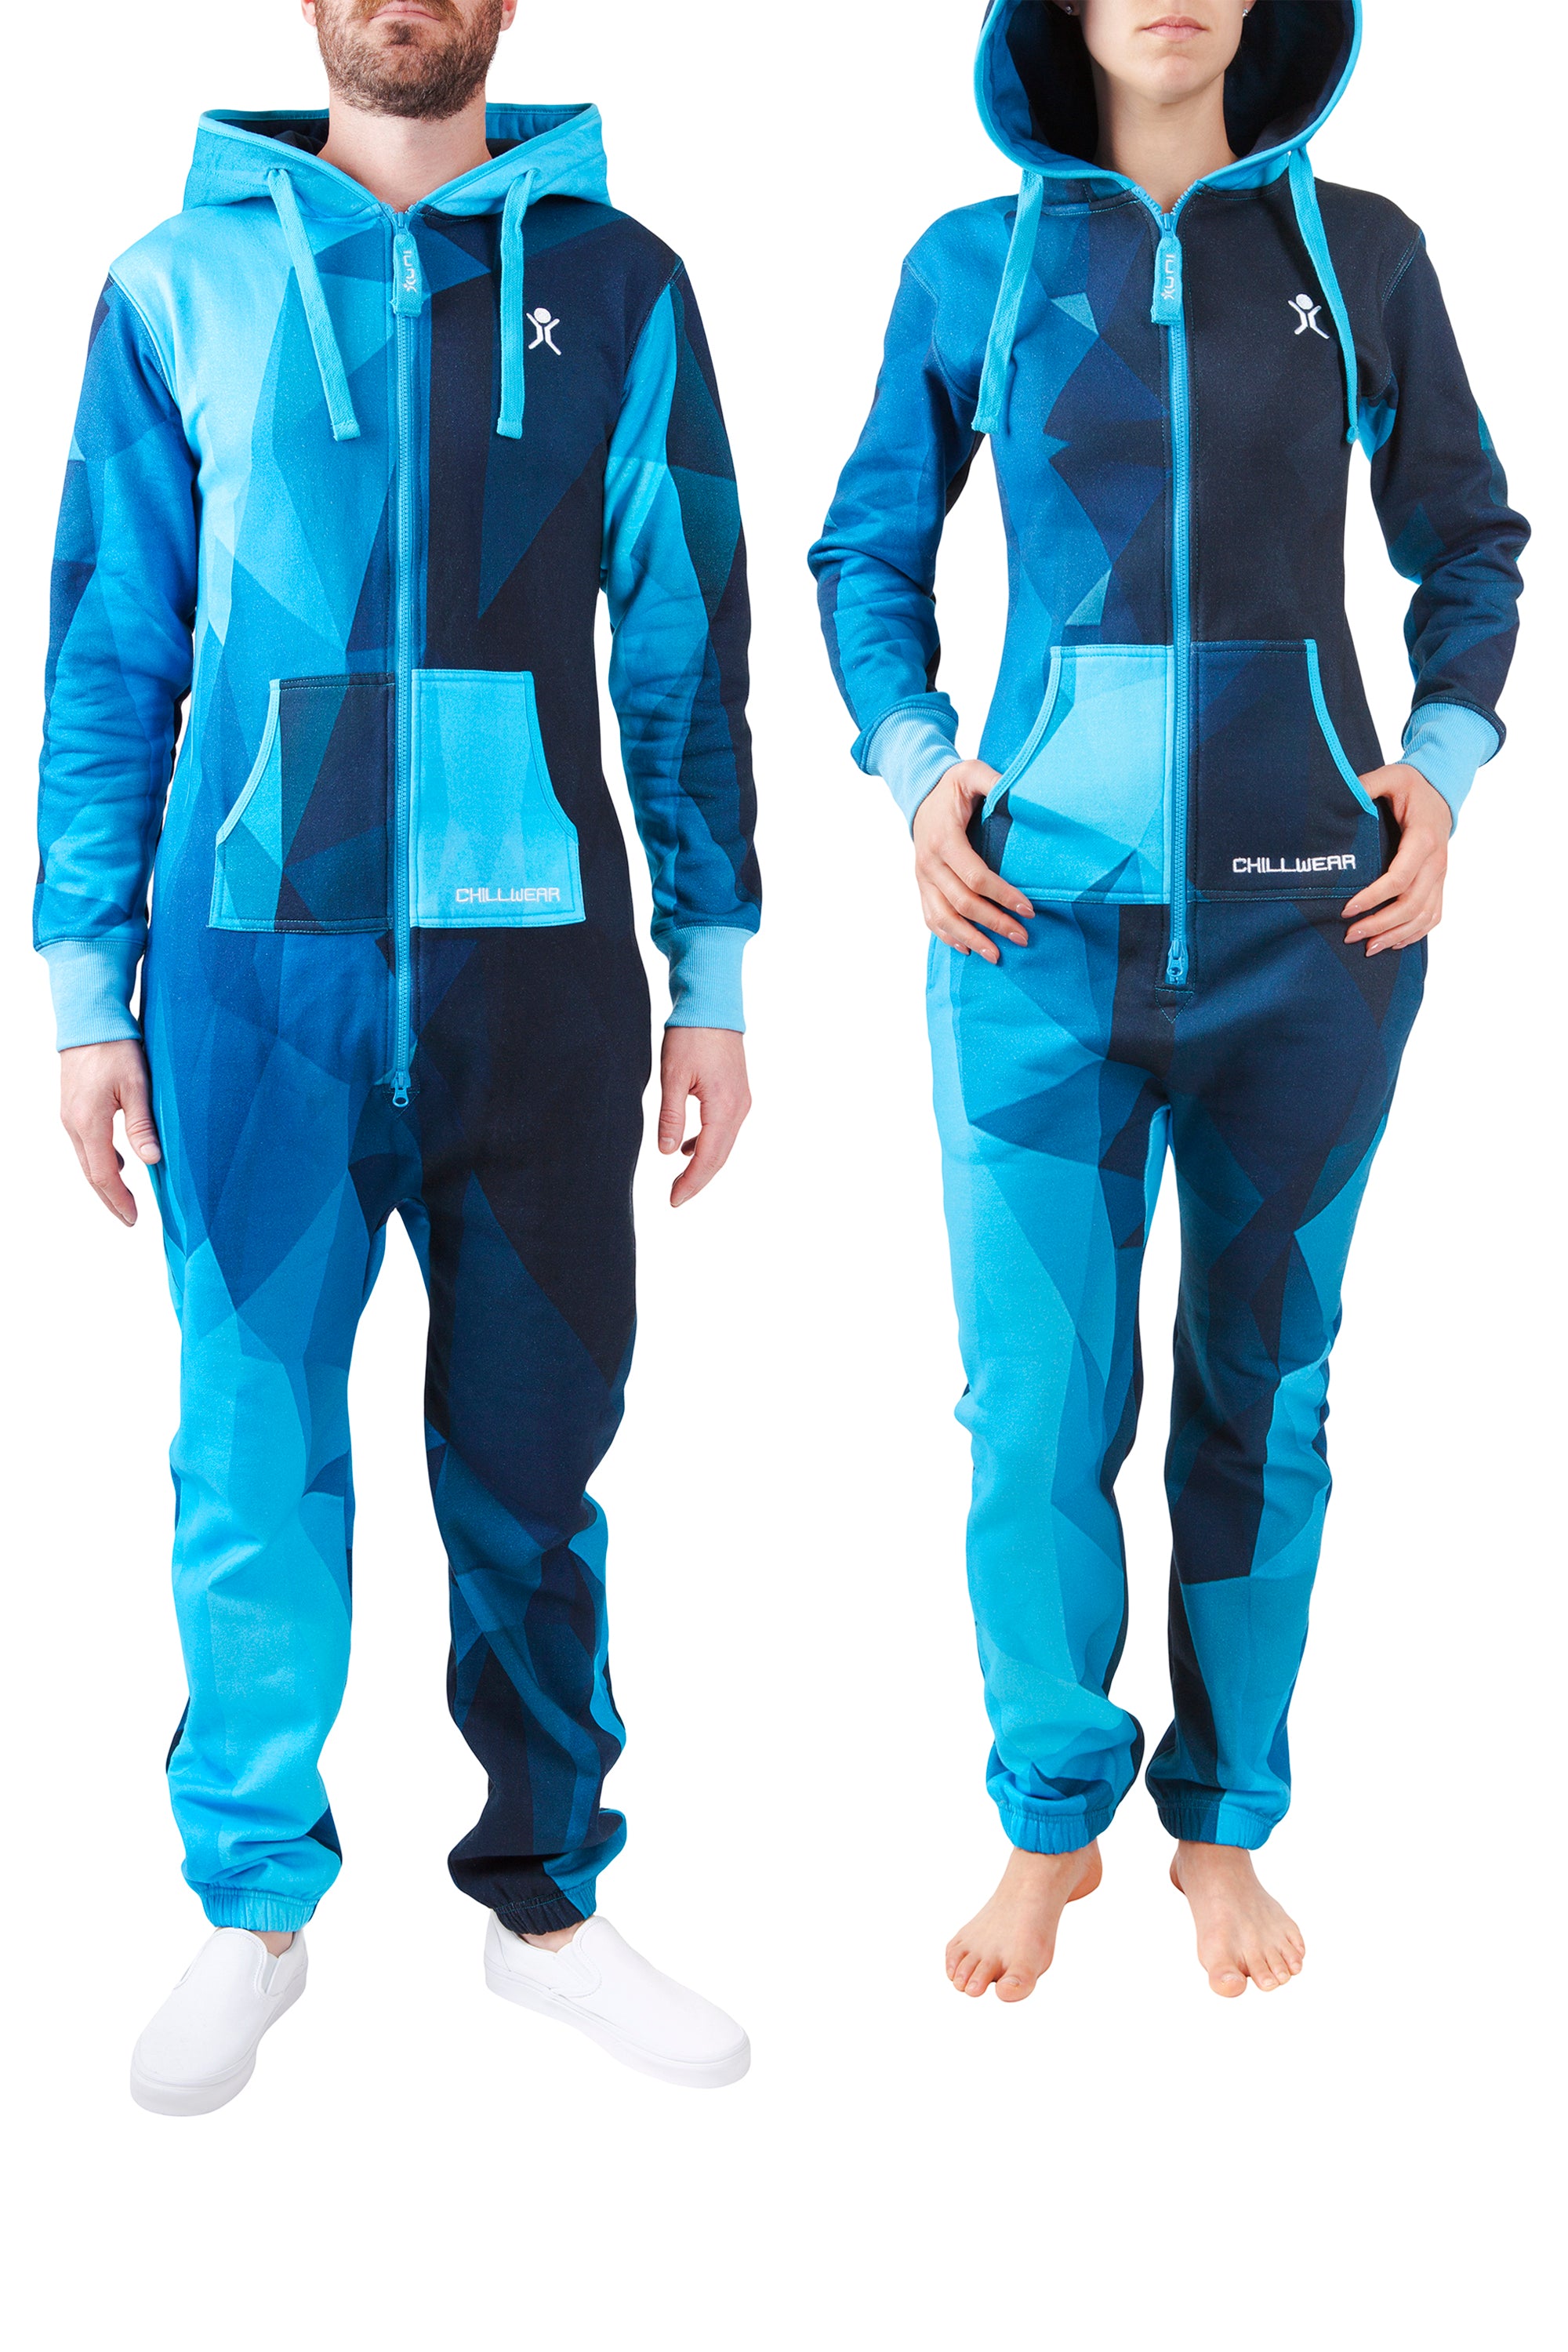 Abstract Navy Blue Adult Onesie